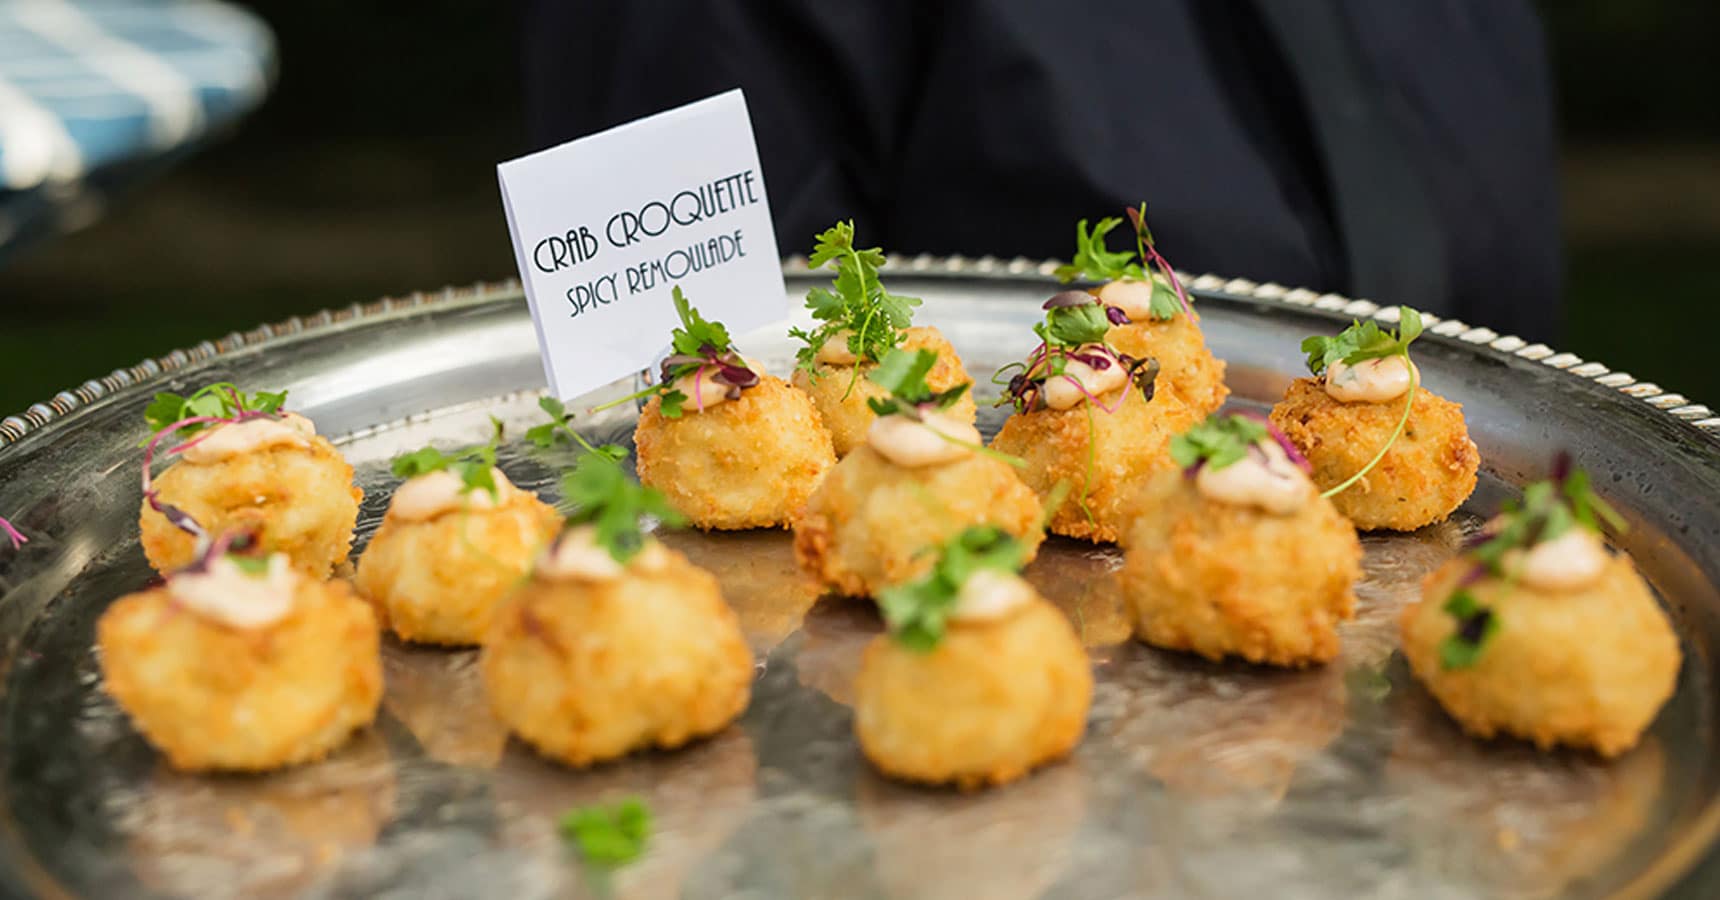 Crab Croquette with a Spicy Remoulade by Crave Catering